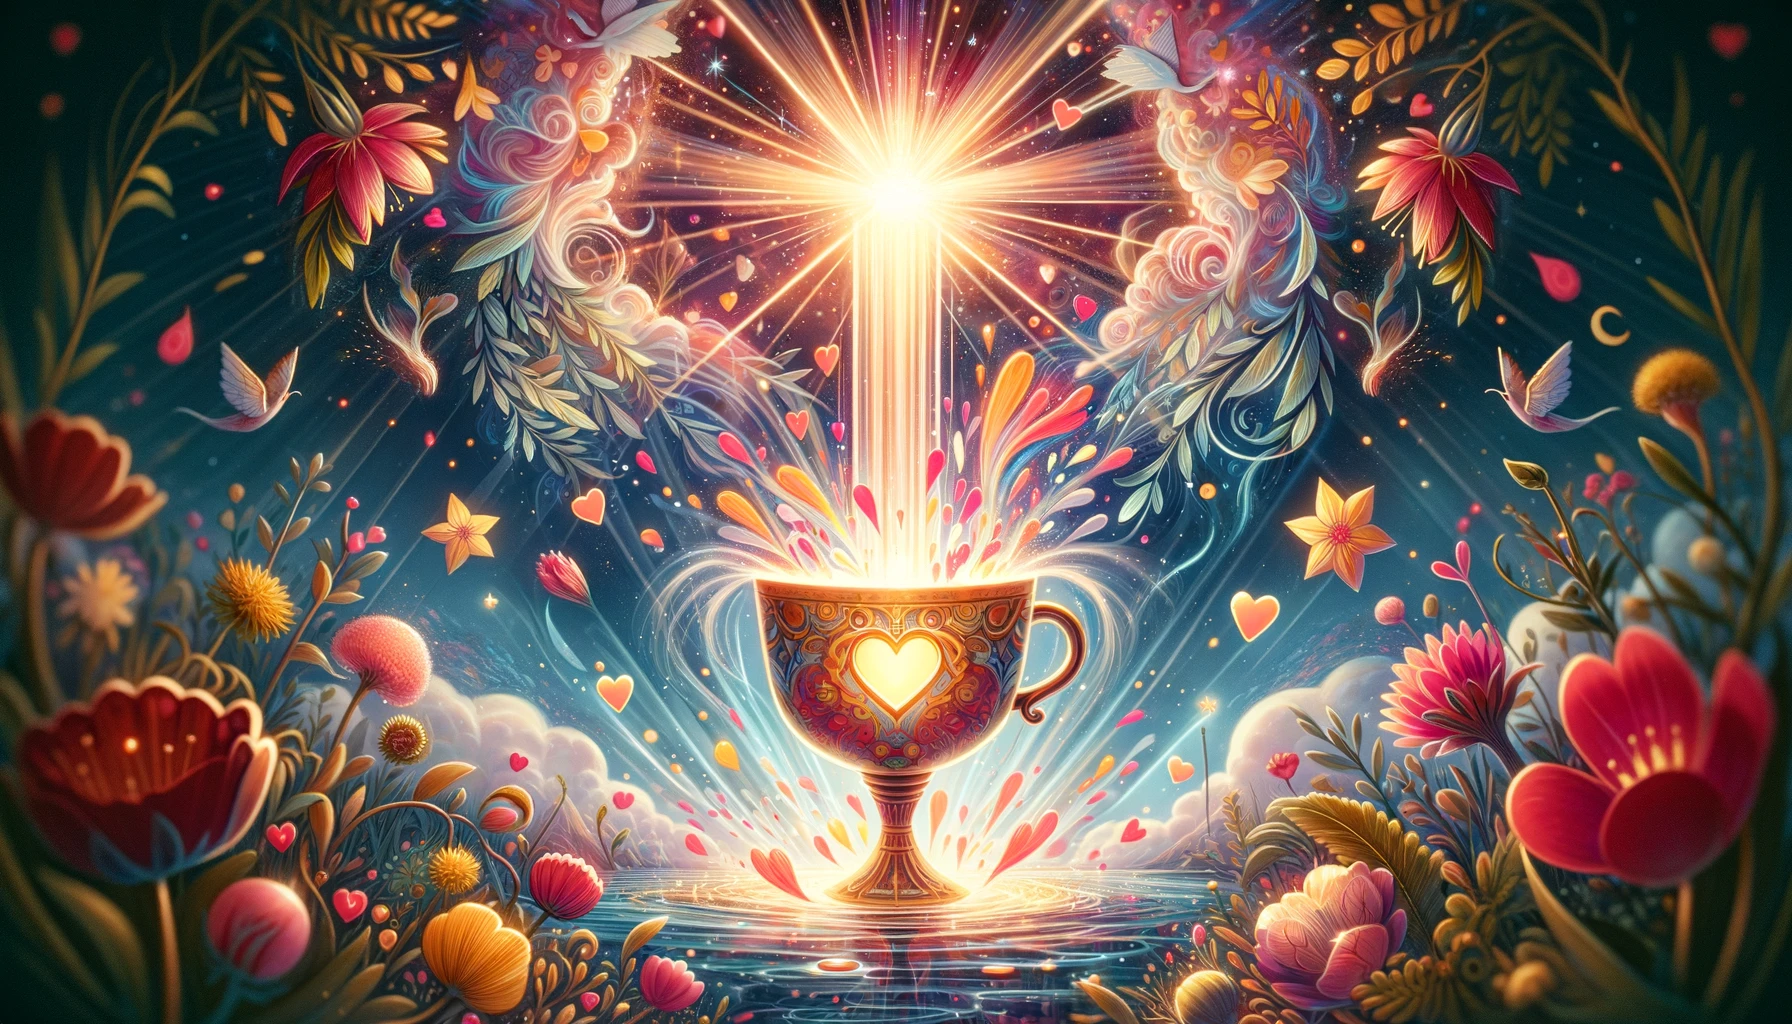 "Illustration portraying the essence of overflowing emotion and unconditional love depicted by the Ace of Cups. Set within a magical landscape, it symbolizes the boundless and nurturing nature of emotional connections, heralding new beginnings, happiness, and fulfillment."